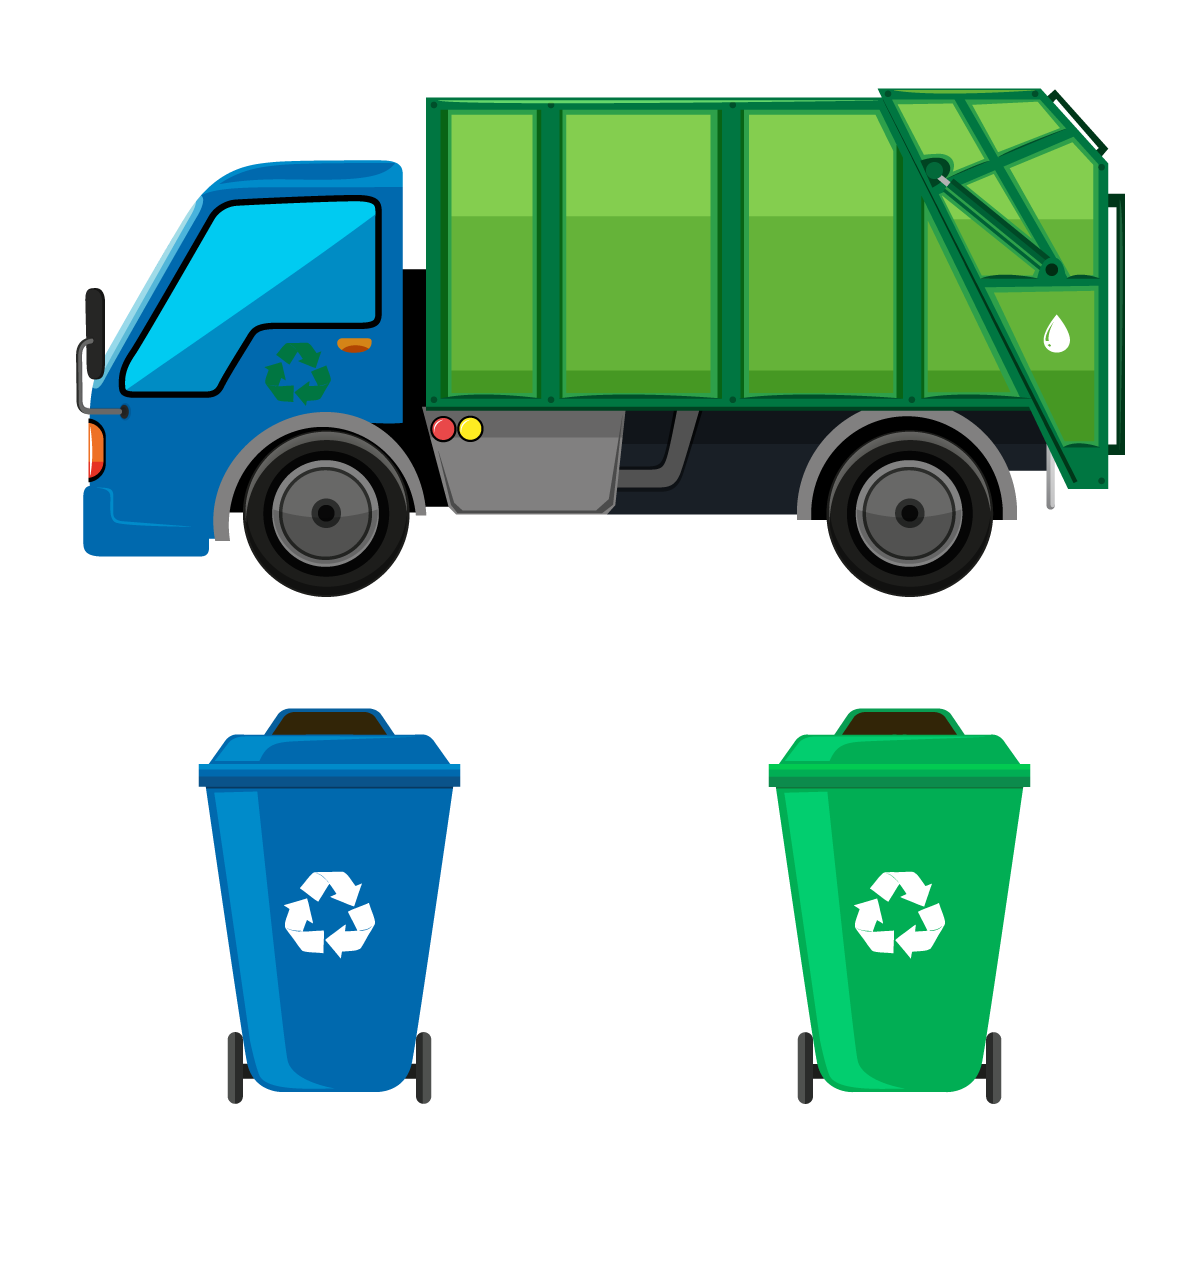 Why Do You Need A Commercial Garbage Collection Service?